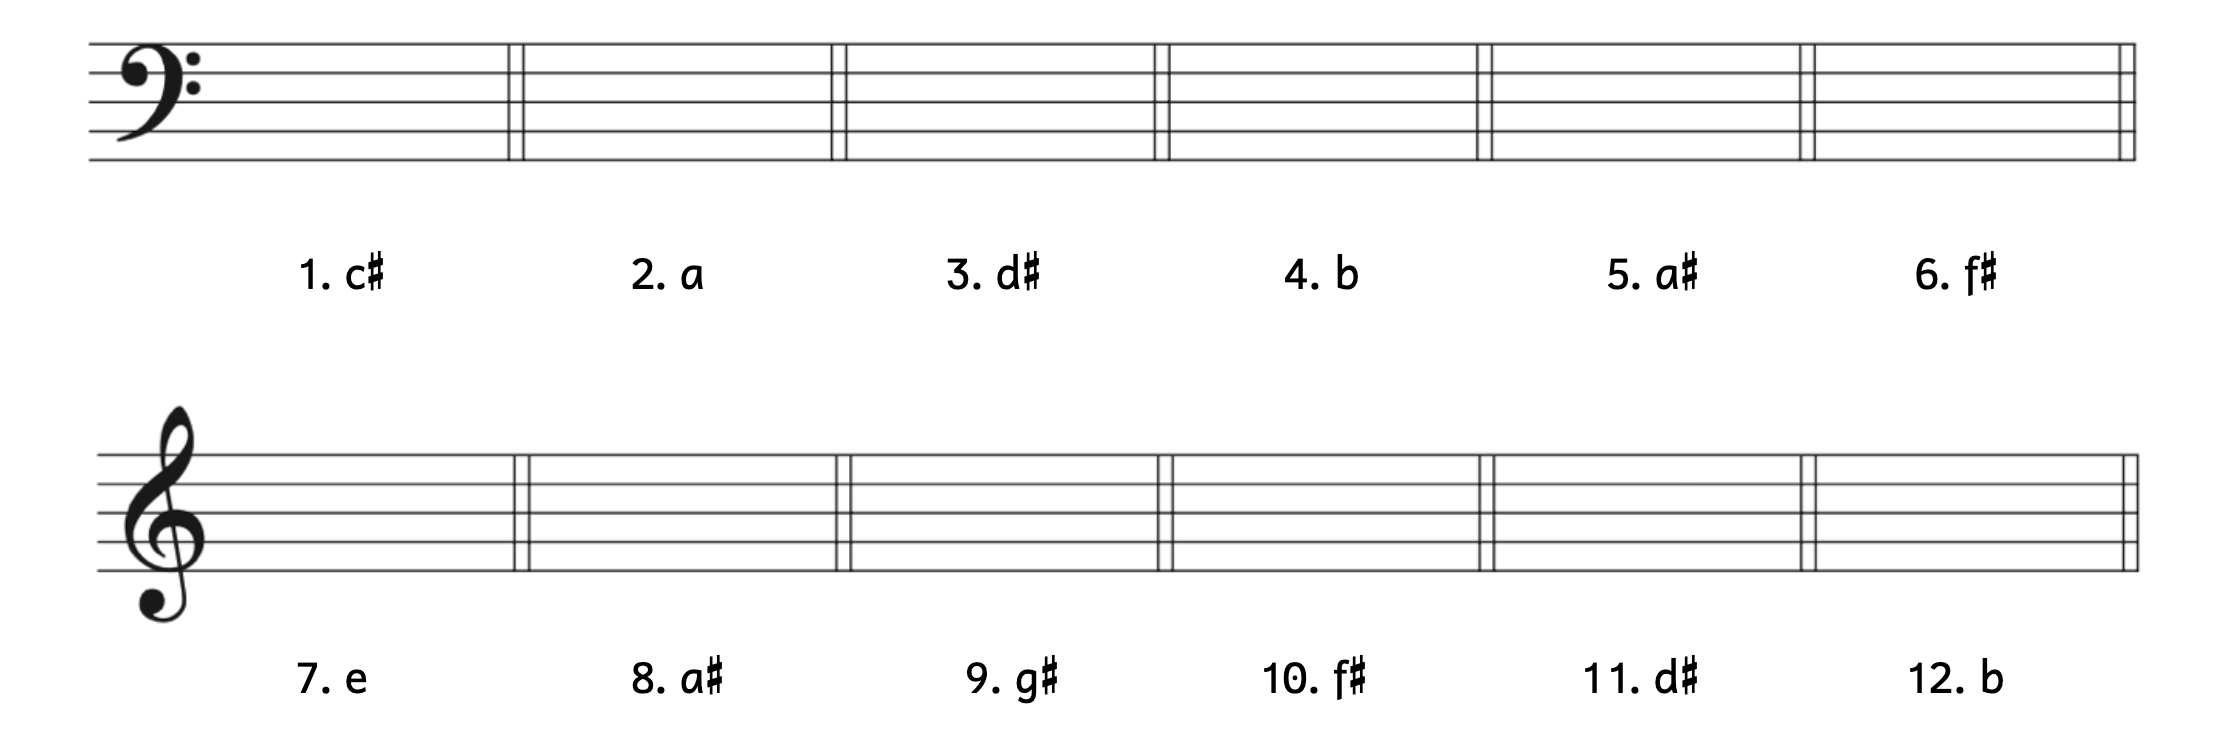 Numbers 1 through 6 are in bass clef. Number 1, C-sharp minor. Number 2, A-minor. Number 3, D-sharp minor. Number 4, B minor. Number 5, A-sharp minor. Number 6, F-sharp minor. Numbers 7 through 12 are in treble clef. Number 7, E minor. Number 8, A-sharp minor. Number 9, G-sharp minor. Number 10, F-sharp minor. Number 11, D-sharp minor. Number 12, B minor.